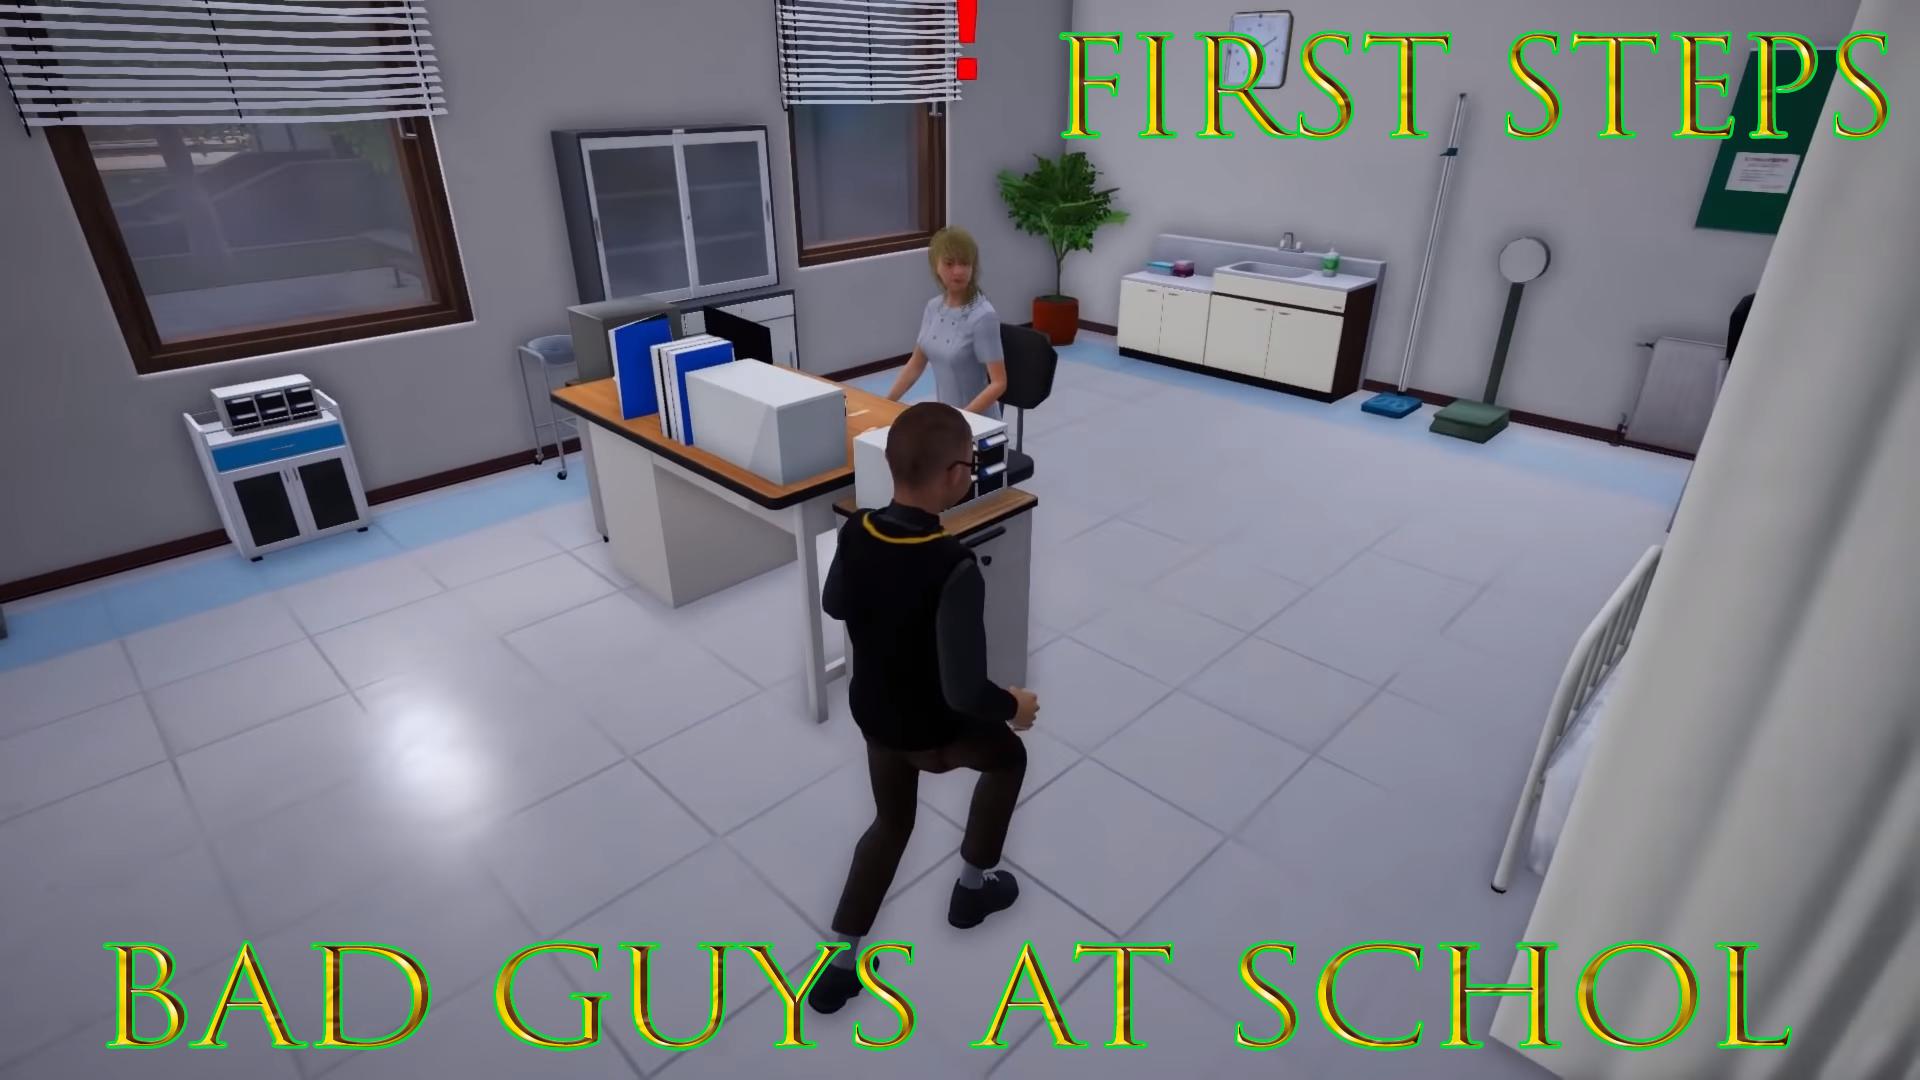 First steps in Bad Guys at school 1.0 Screenshot 4